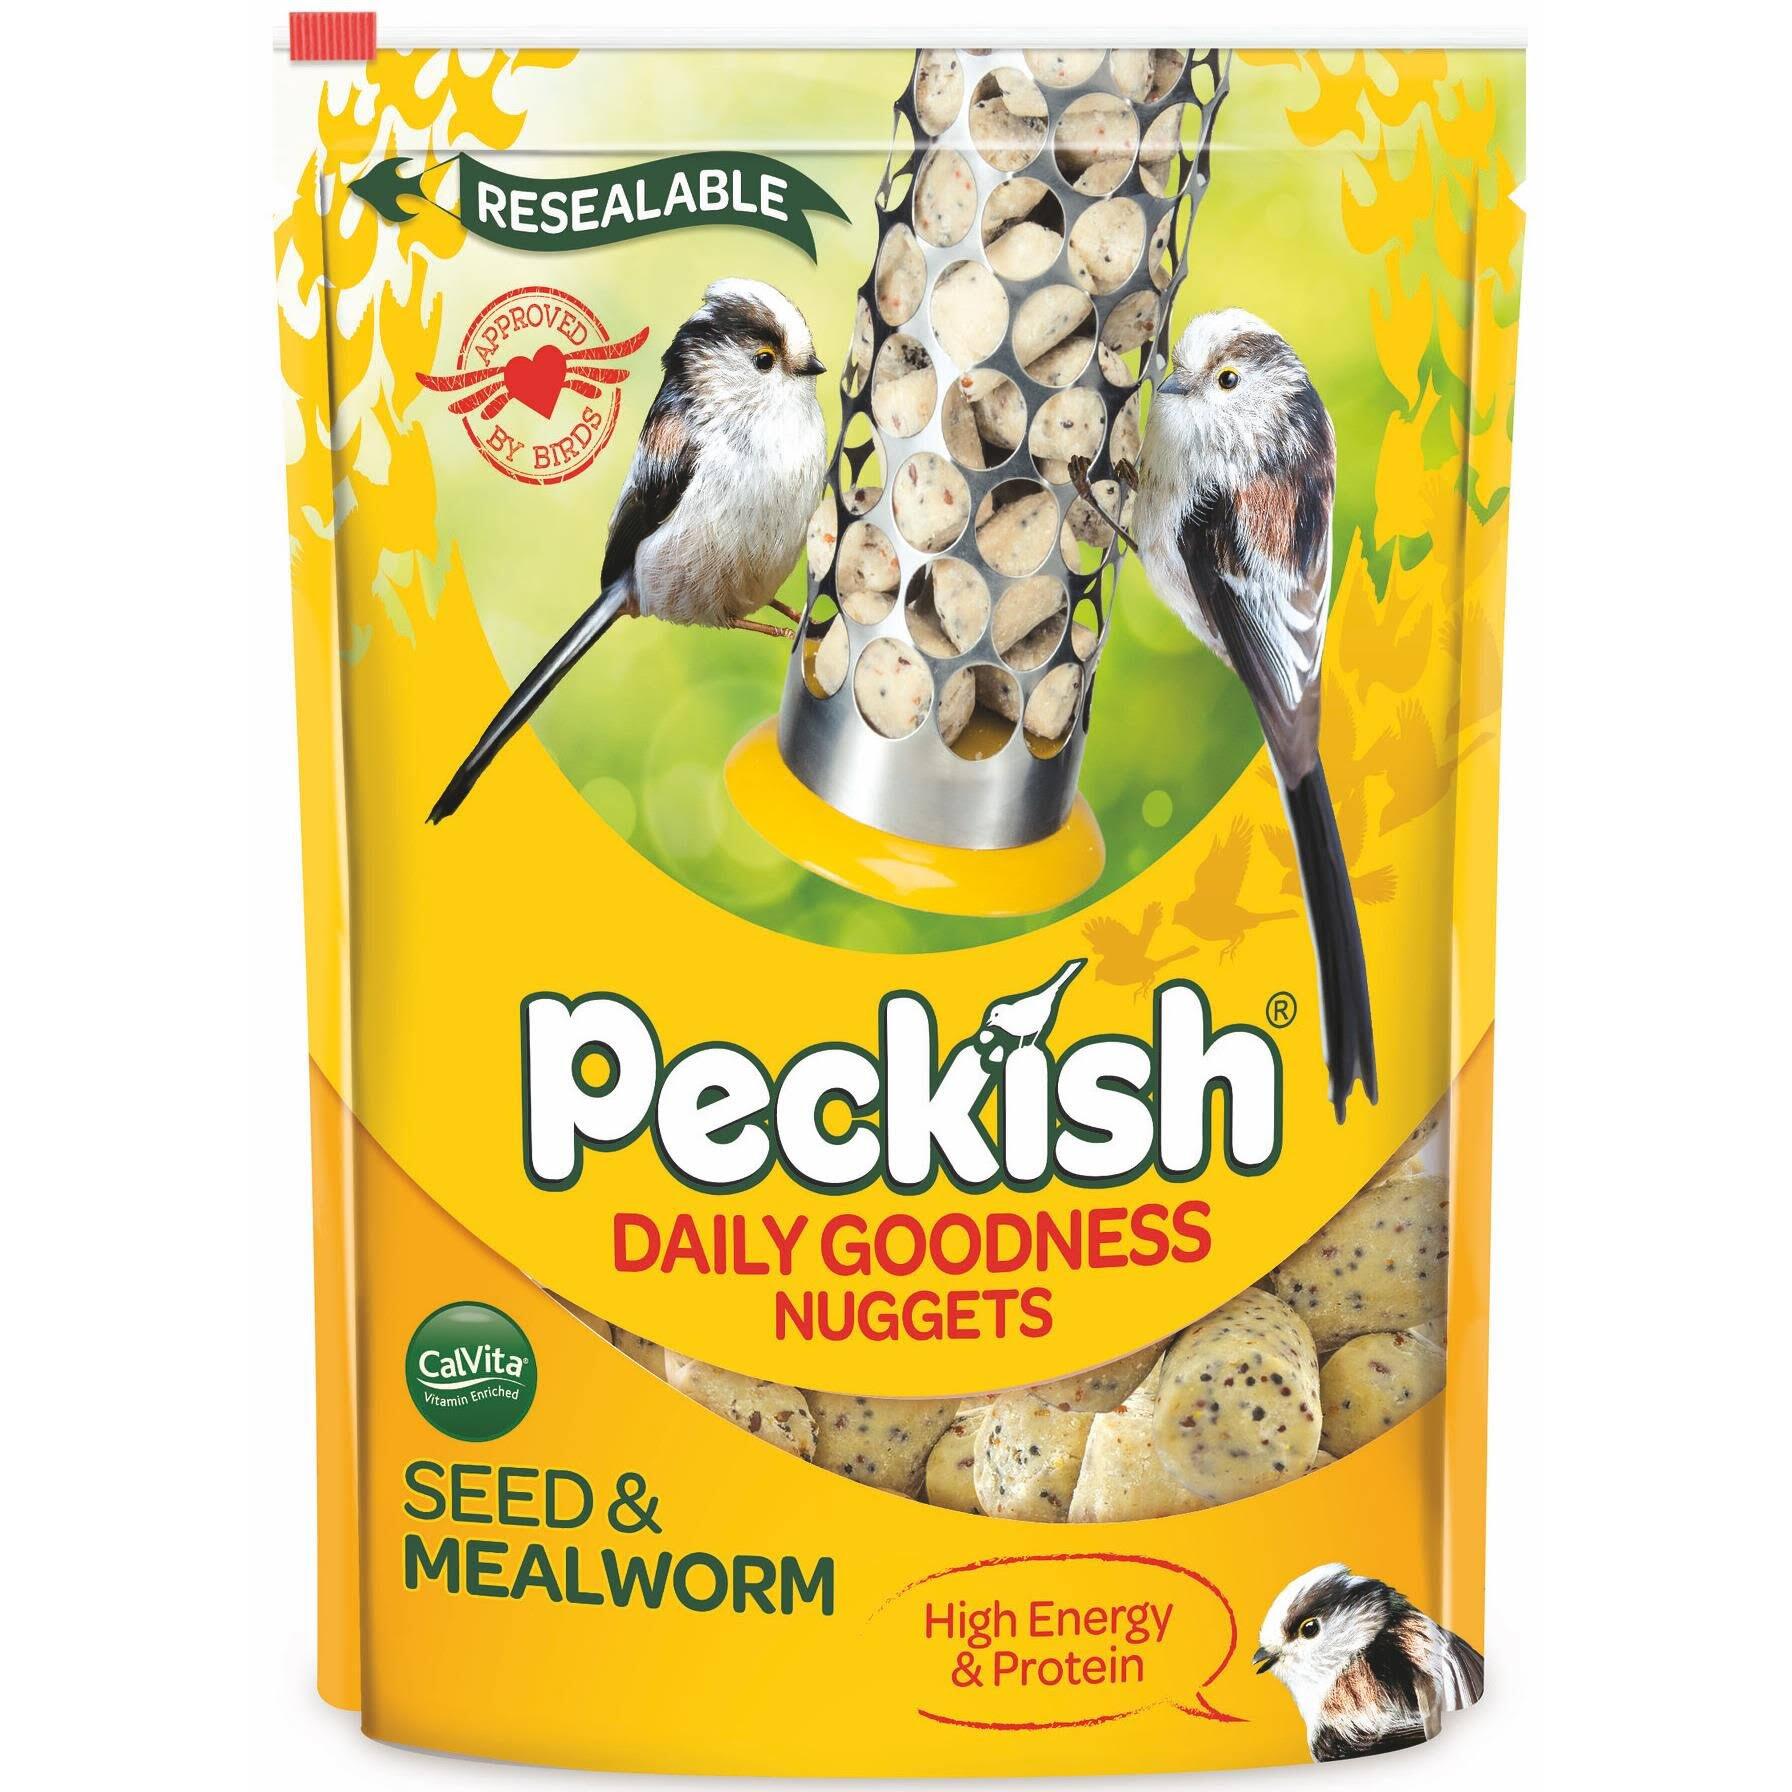 Peckish Daily Goodness Nuggets - Seed and Mealworm, 1kg